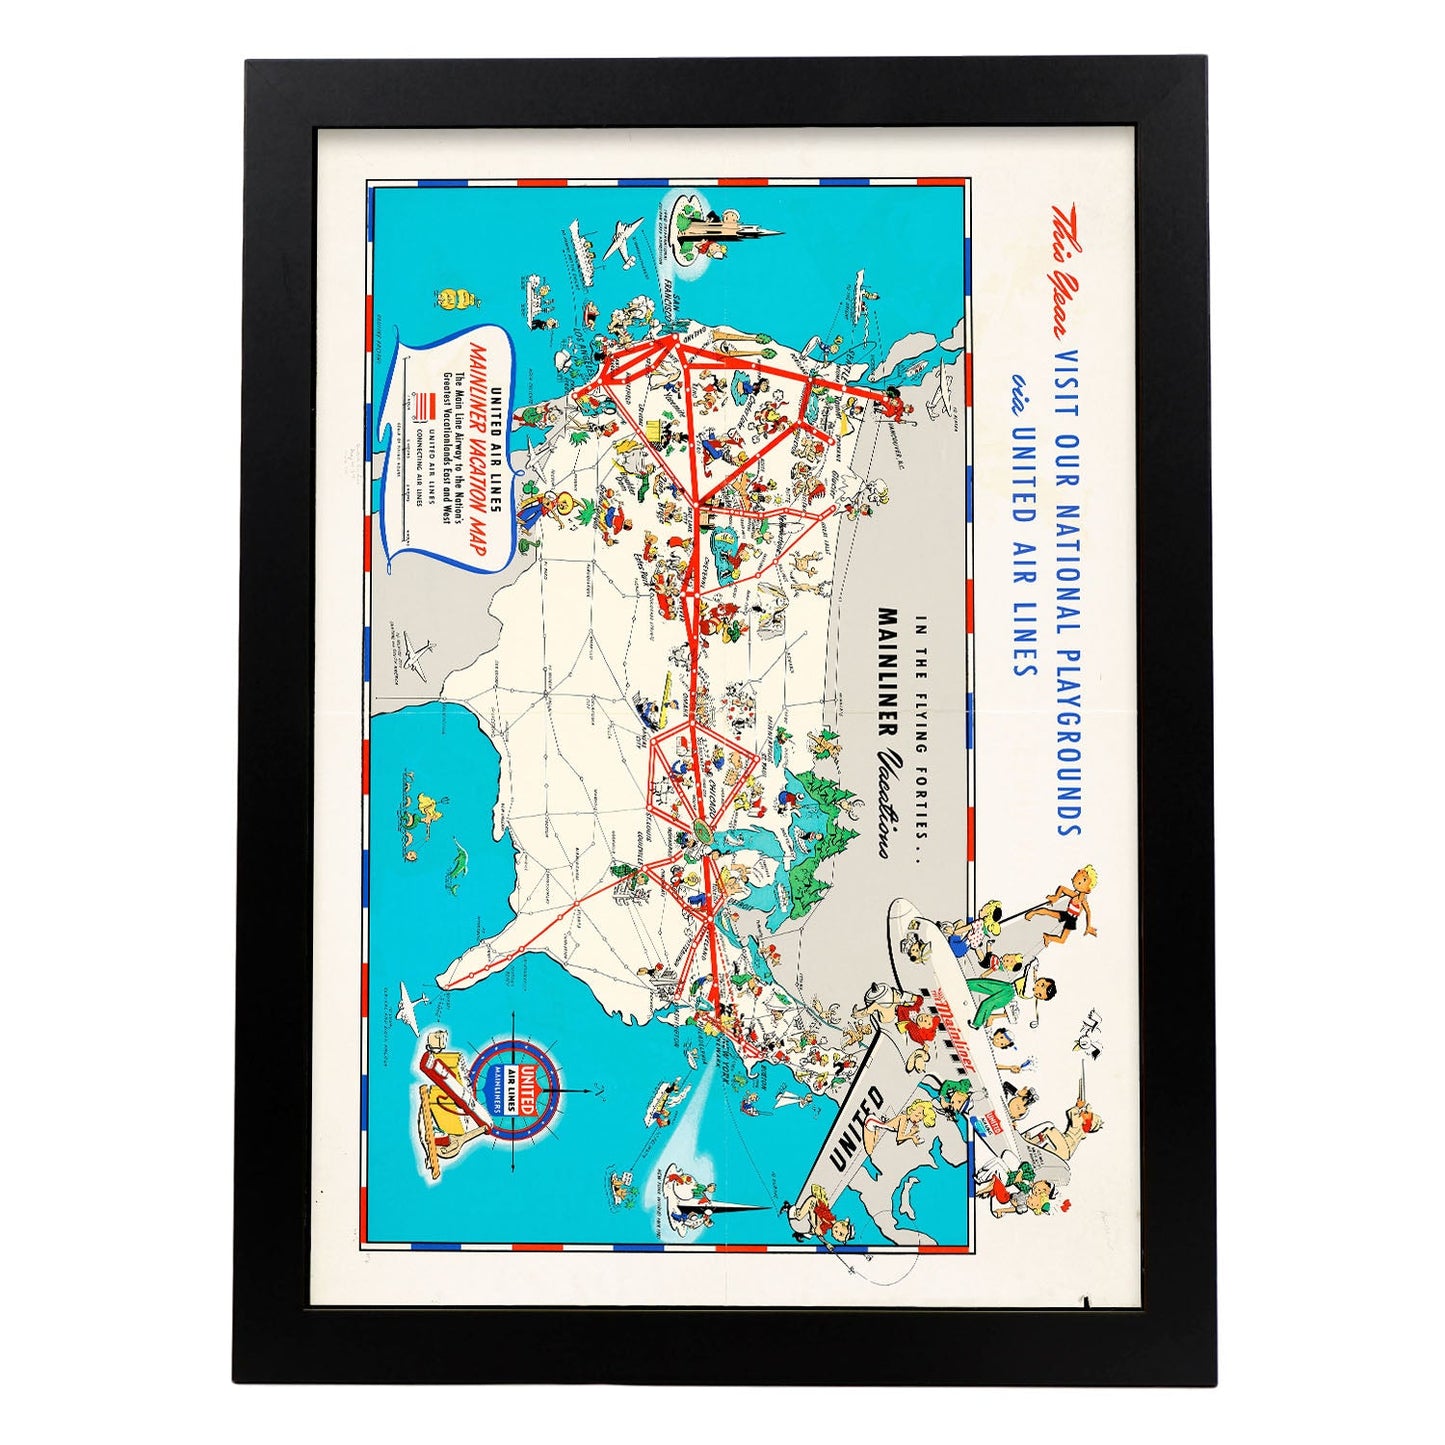 United_Air_Lines_mainliner_vacation_map_-_the_main_line_airway_to_the_nations_greatesst_vacationlands_east_and_west-Artwork-Nacnic-A3-Sin marco-Nacnic Estudio SL